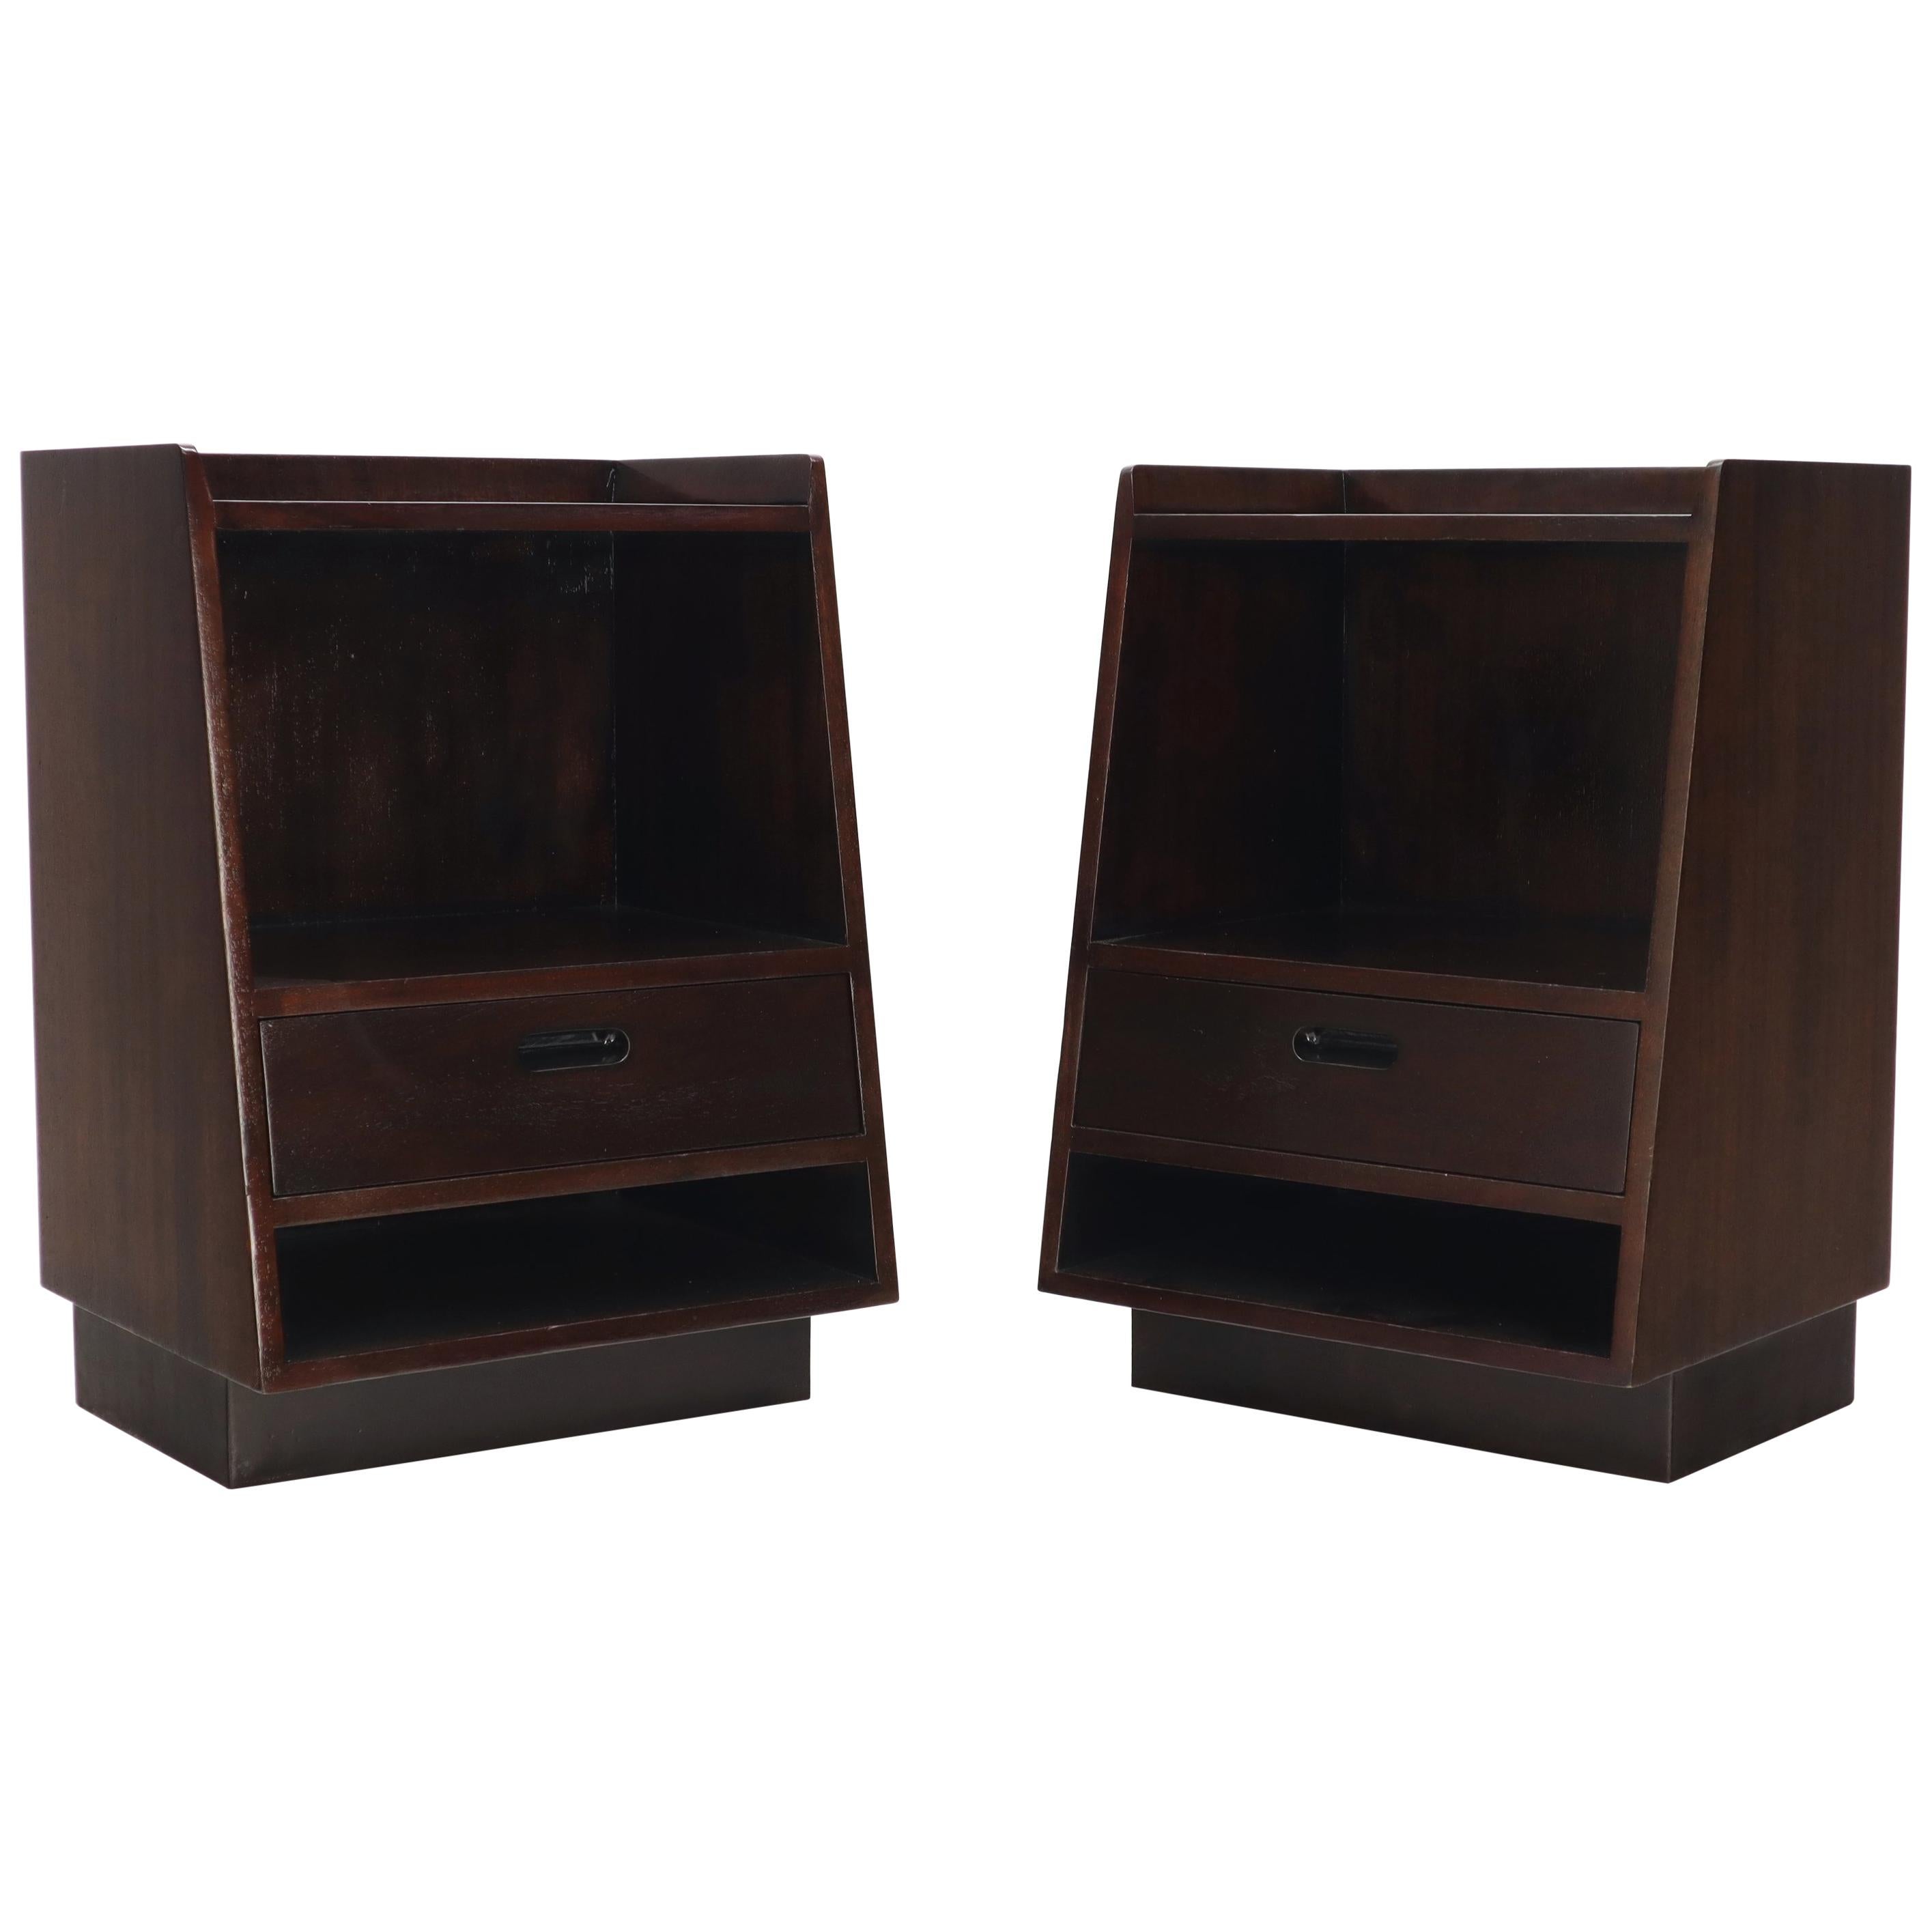 Pair of Edward Wormley for Dunbar Dark Chocolate End Tables Nightstands For Sale